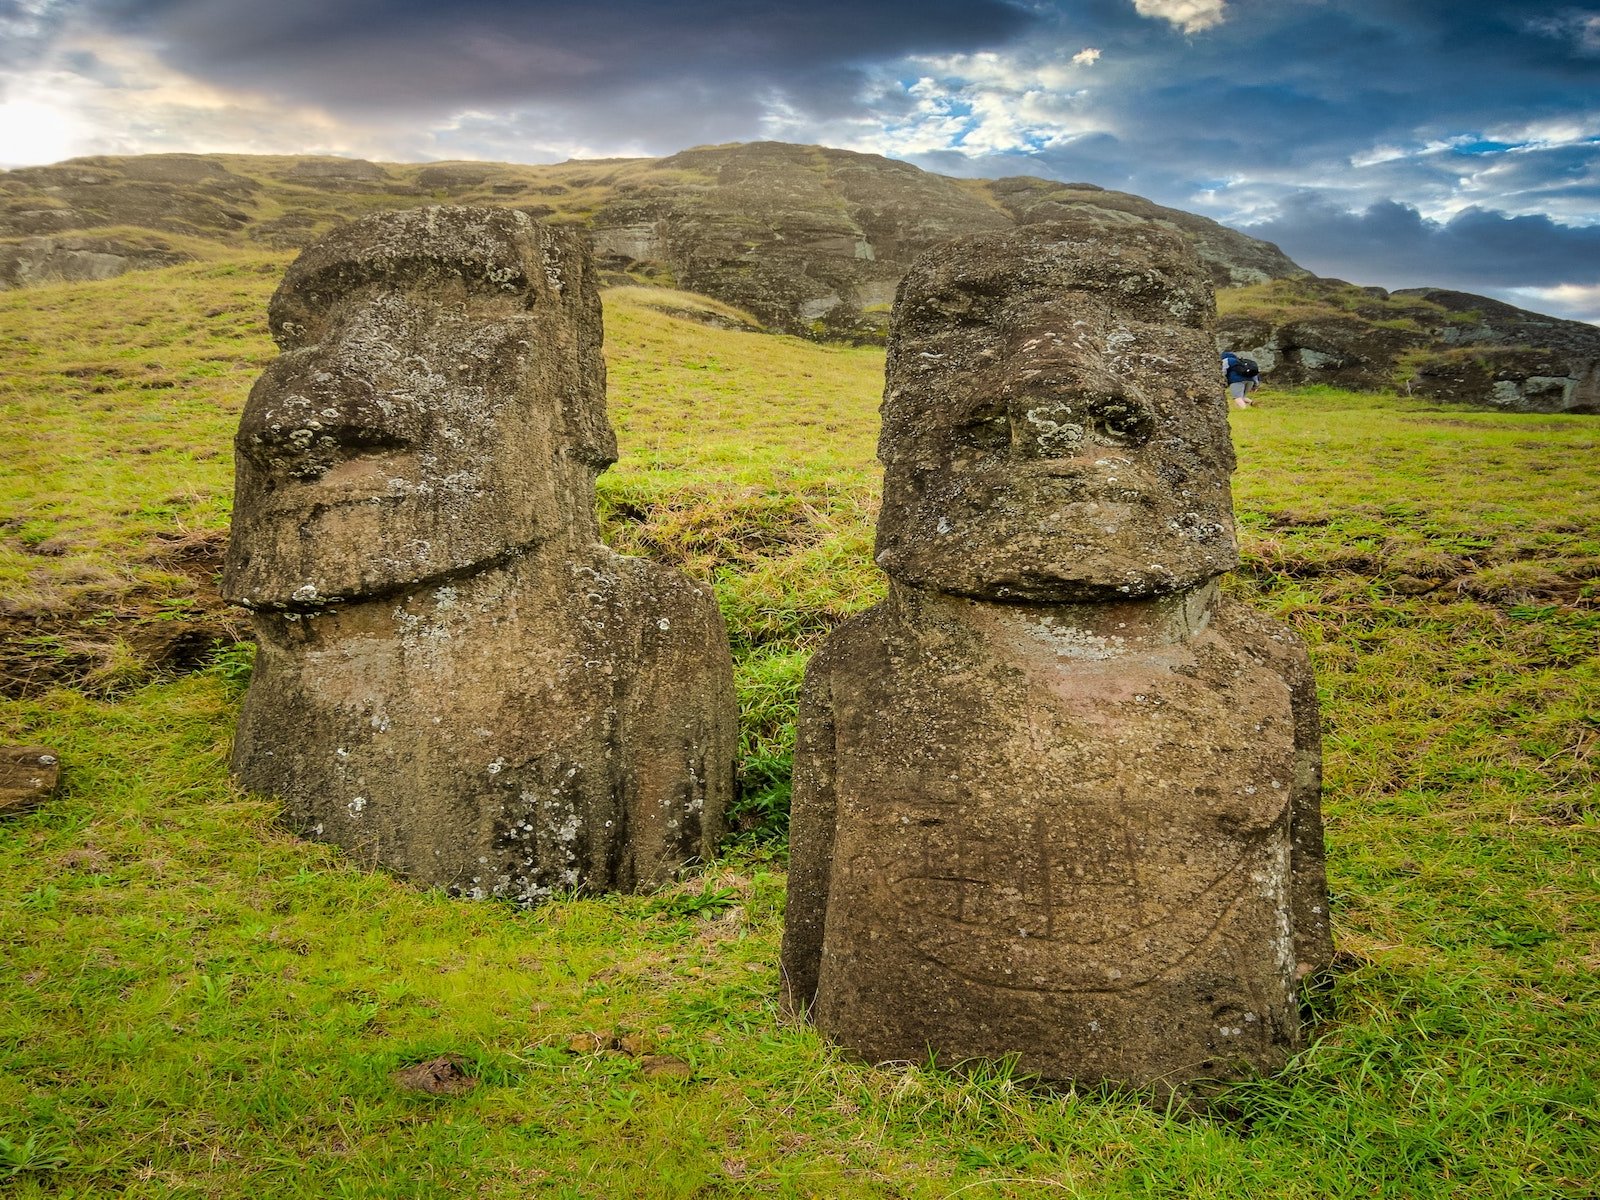 The famous Easter Island statues.